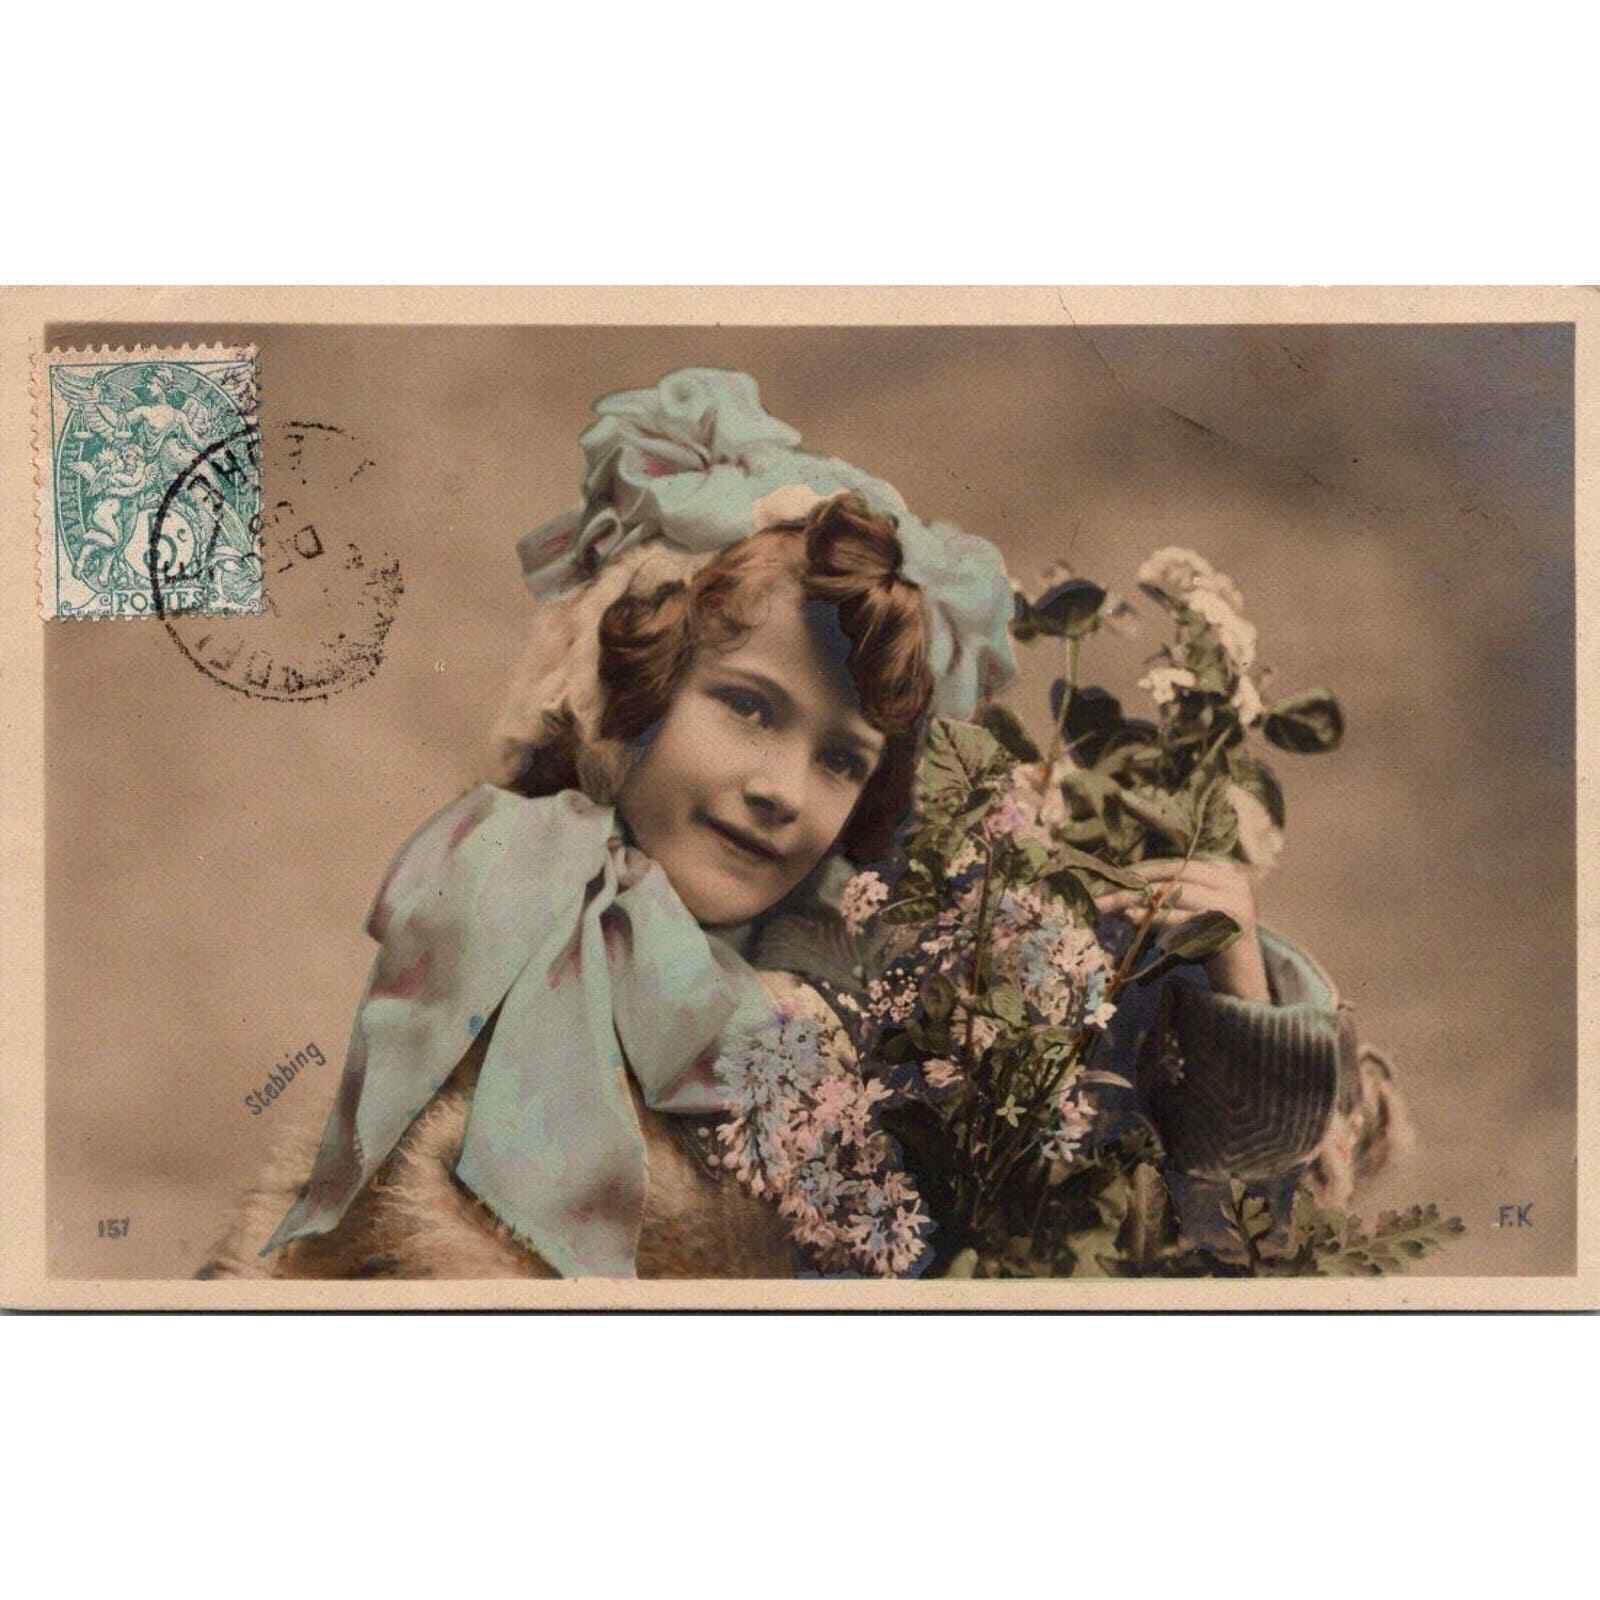 Vintage Edwardian Stebbing Postcard Girl with Flowers Painted France 1900s